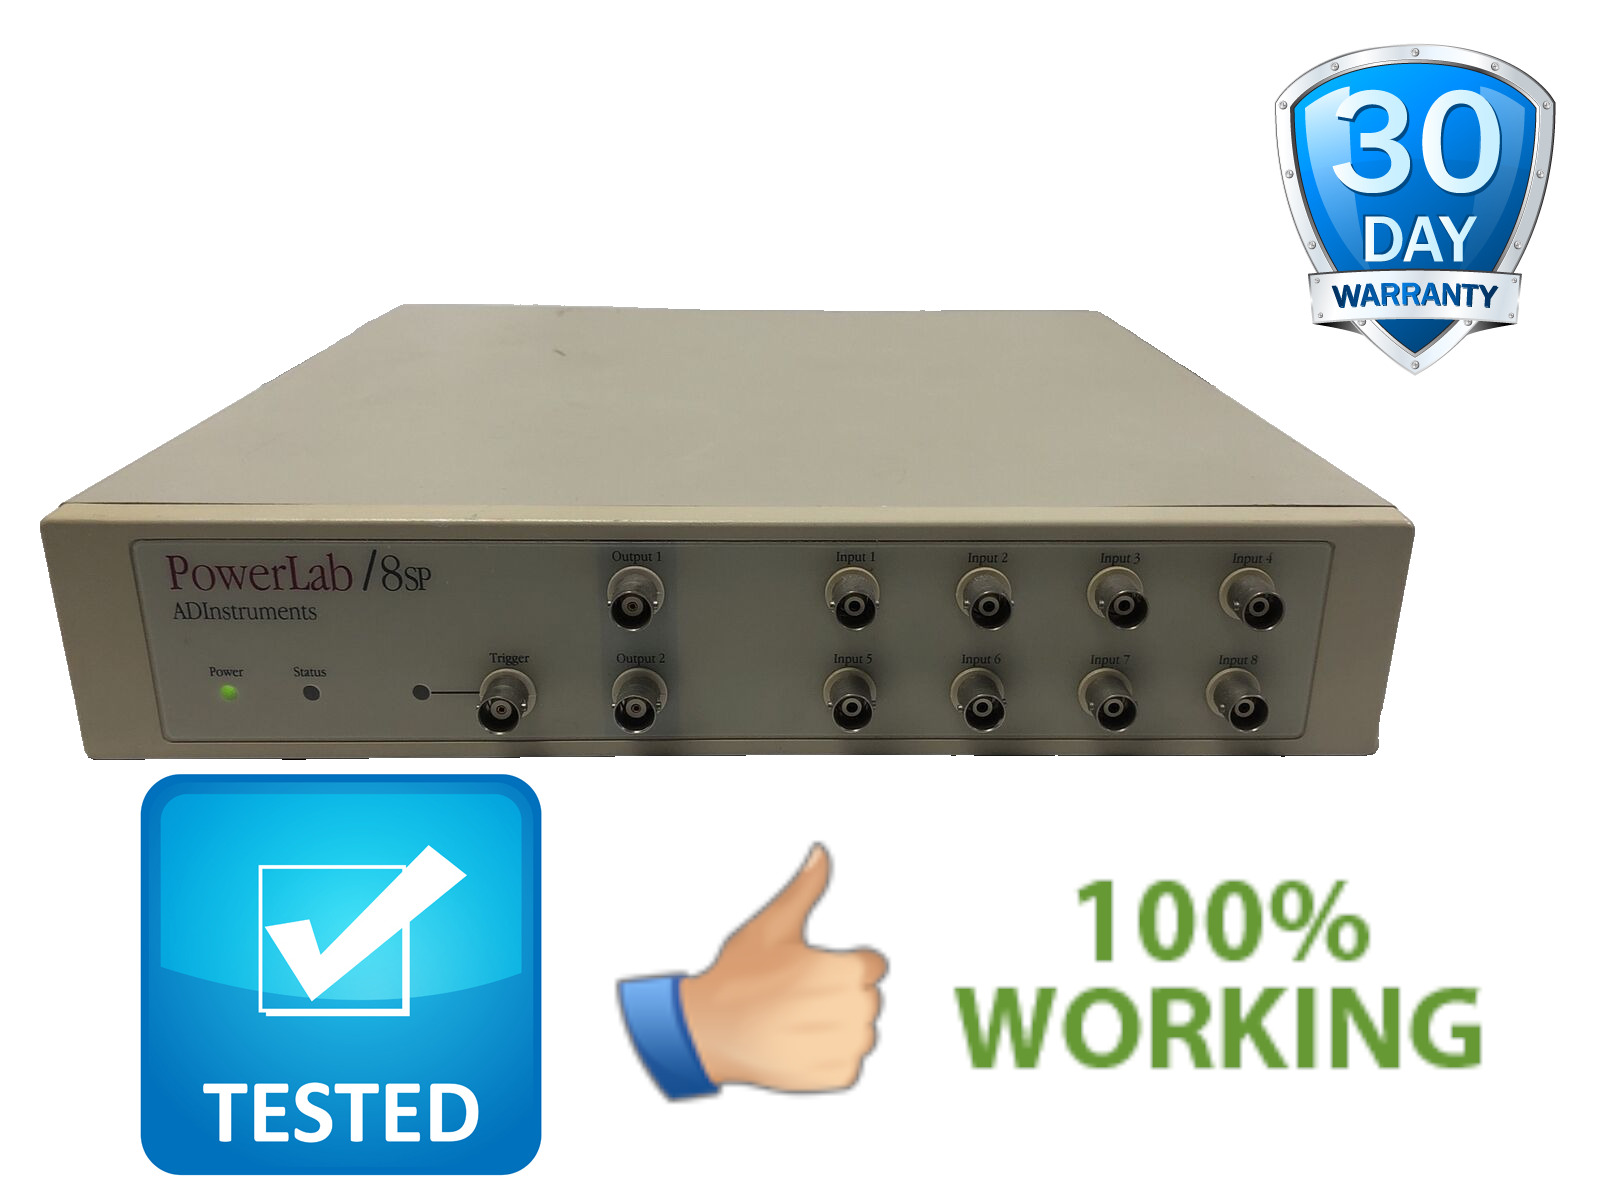 ADInstruments PowerLab/8SP 8 Channel Data Acquisition System Tested Warranty